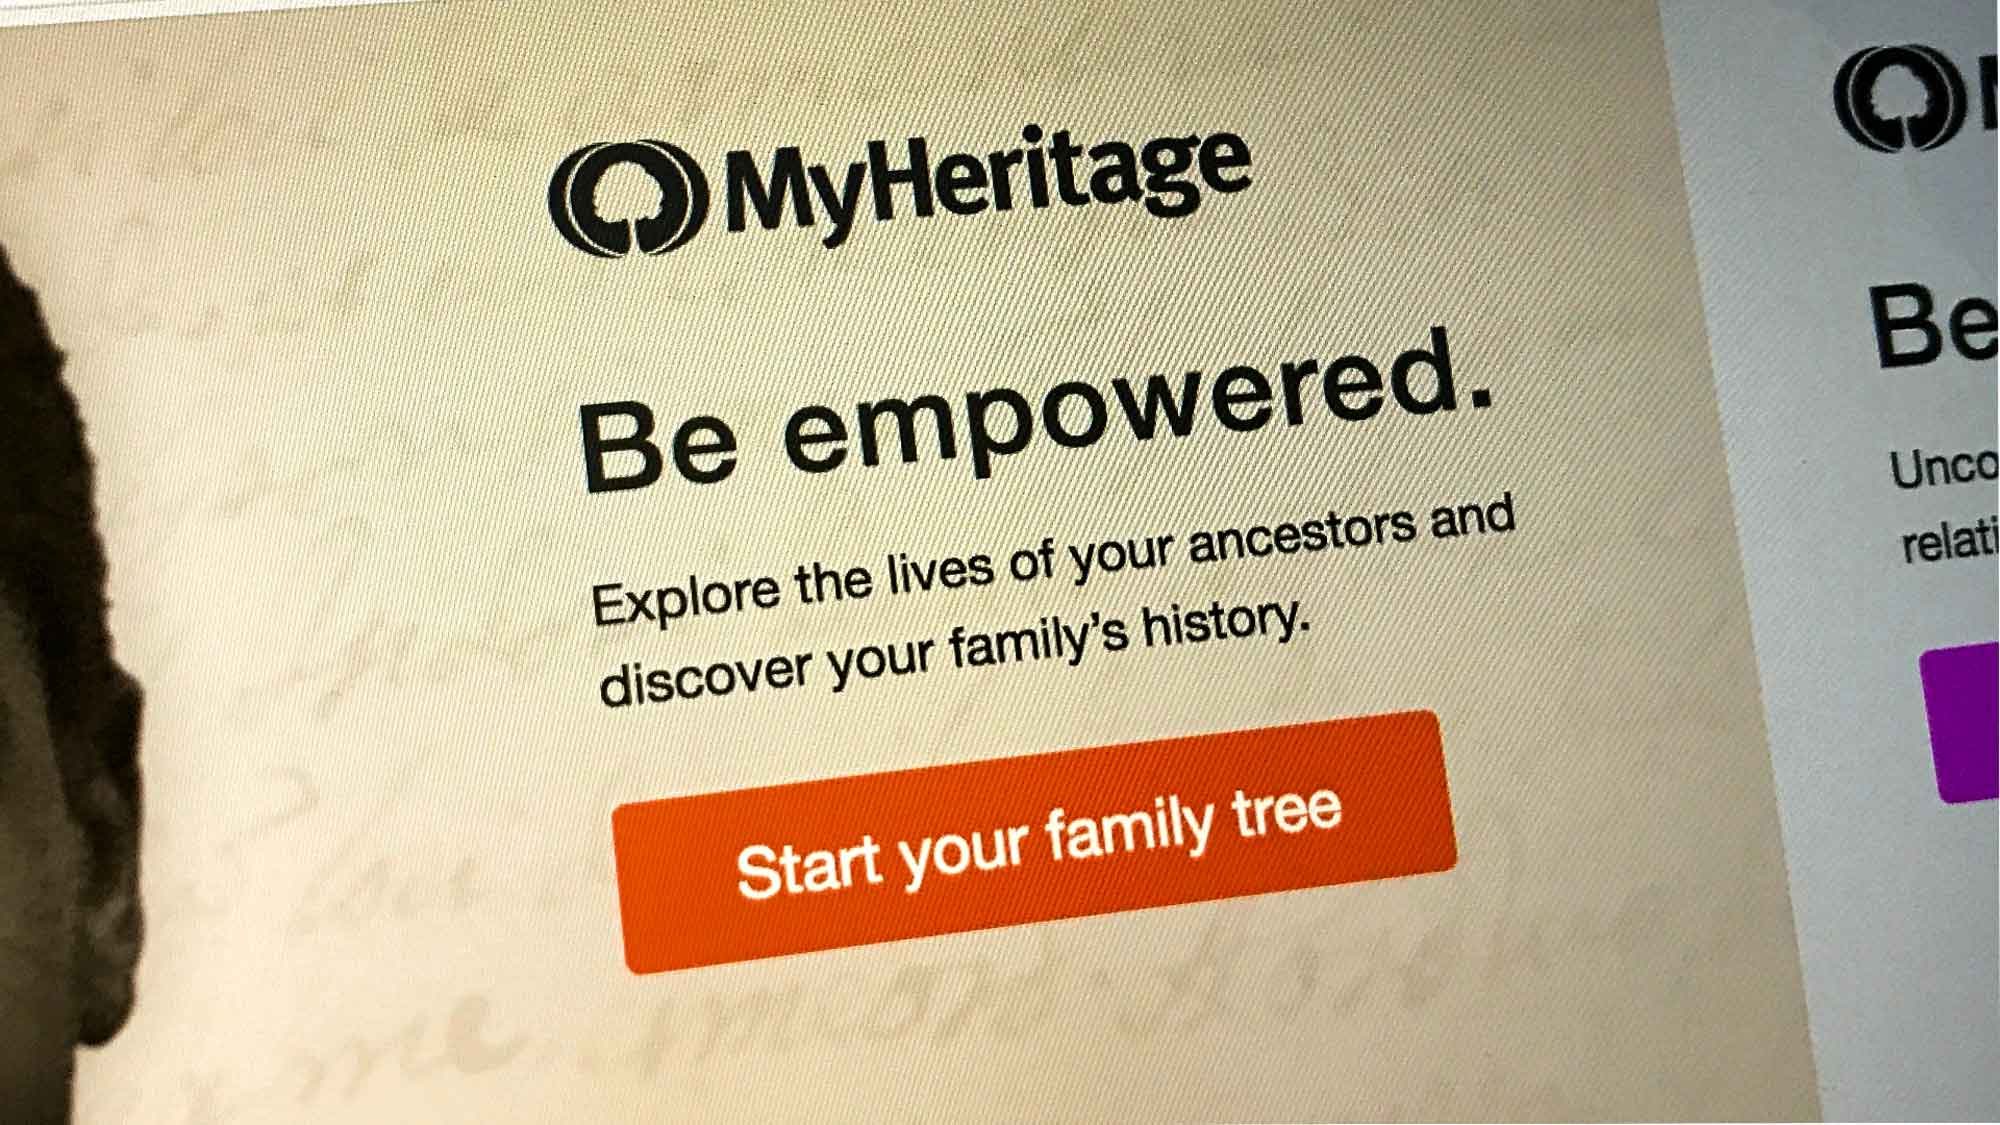 Genetic Genealogy For Family History Researchers - MyHeritage Knowledge Base